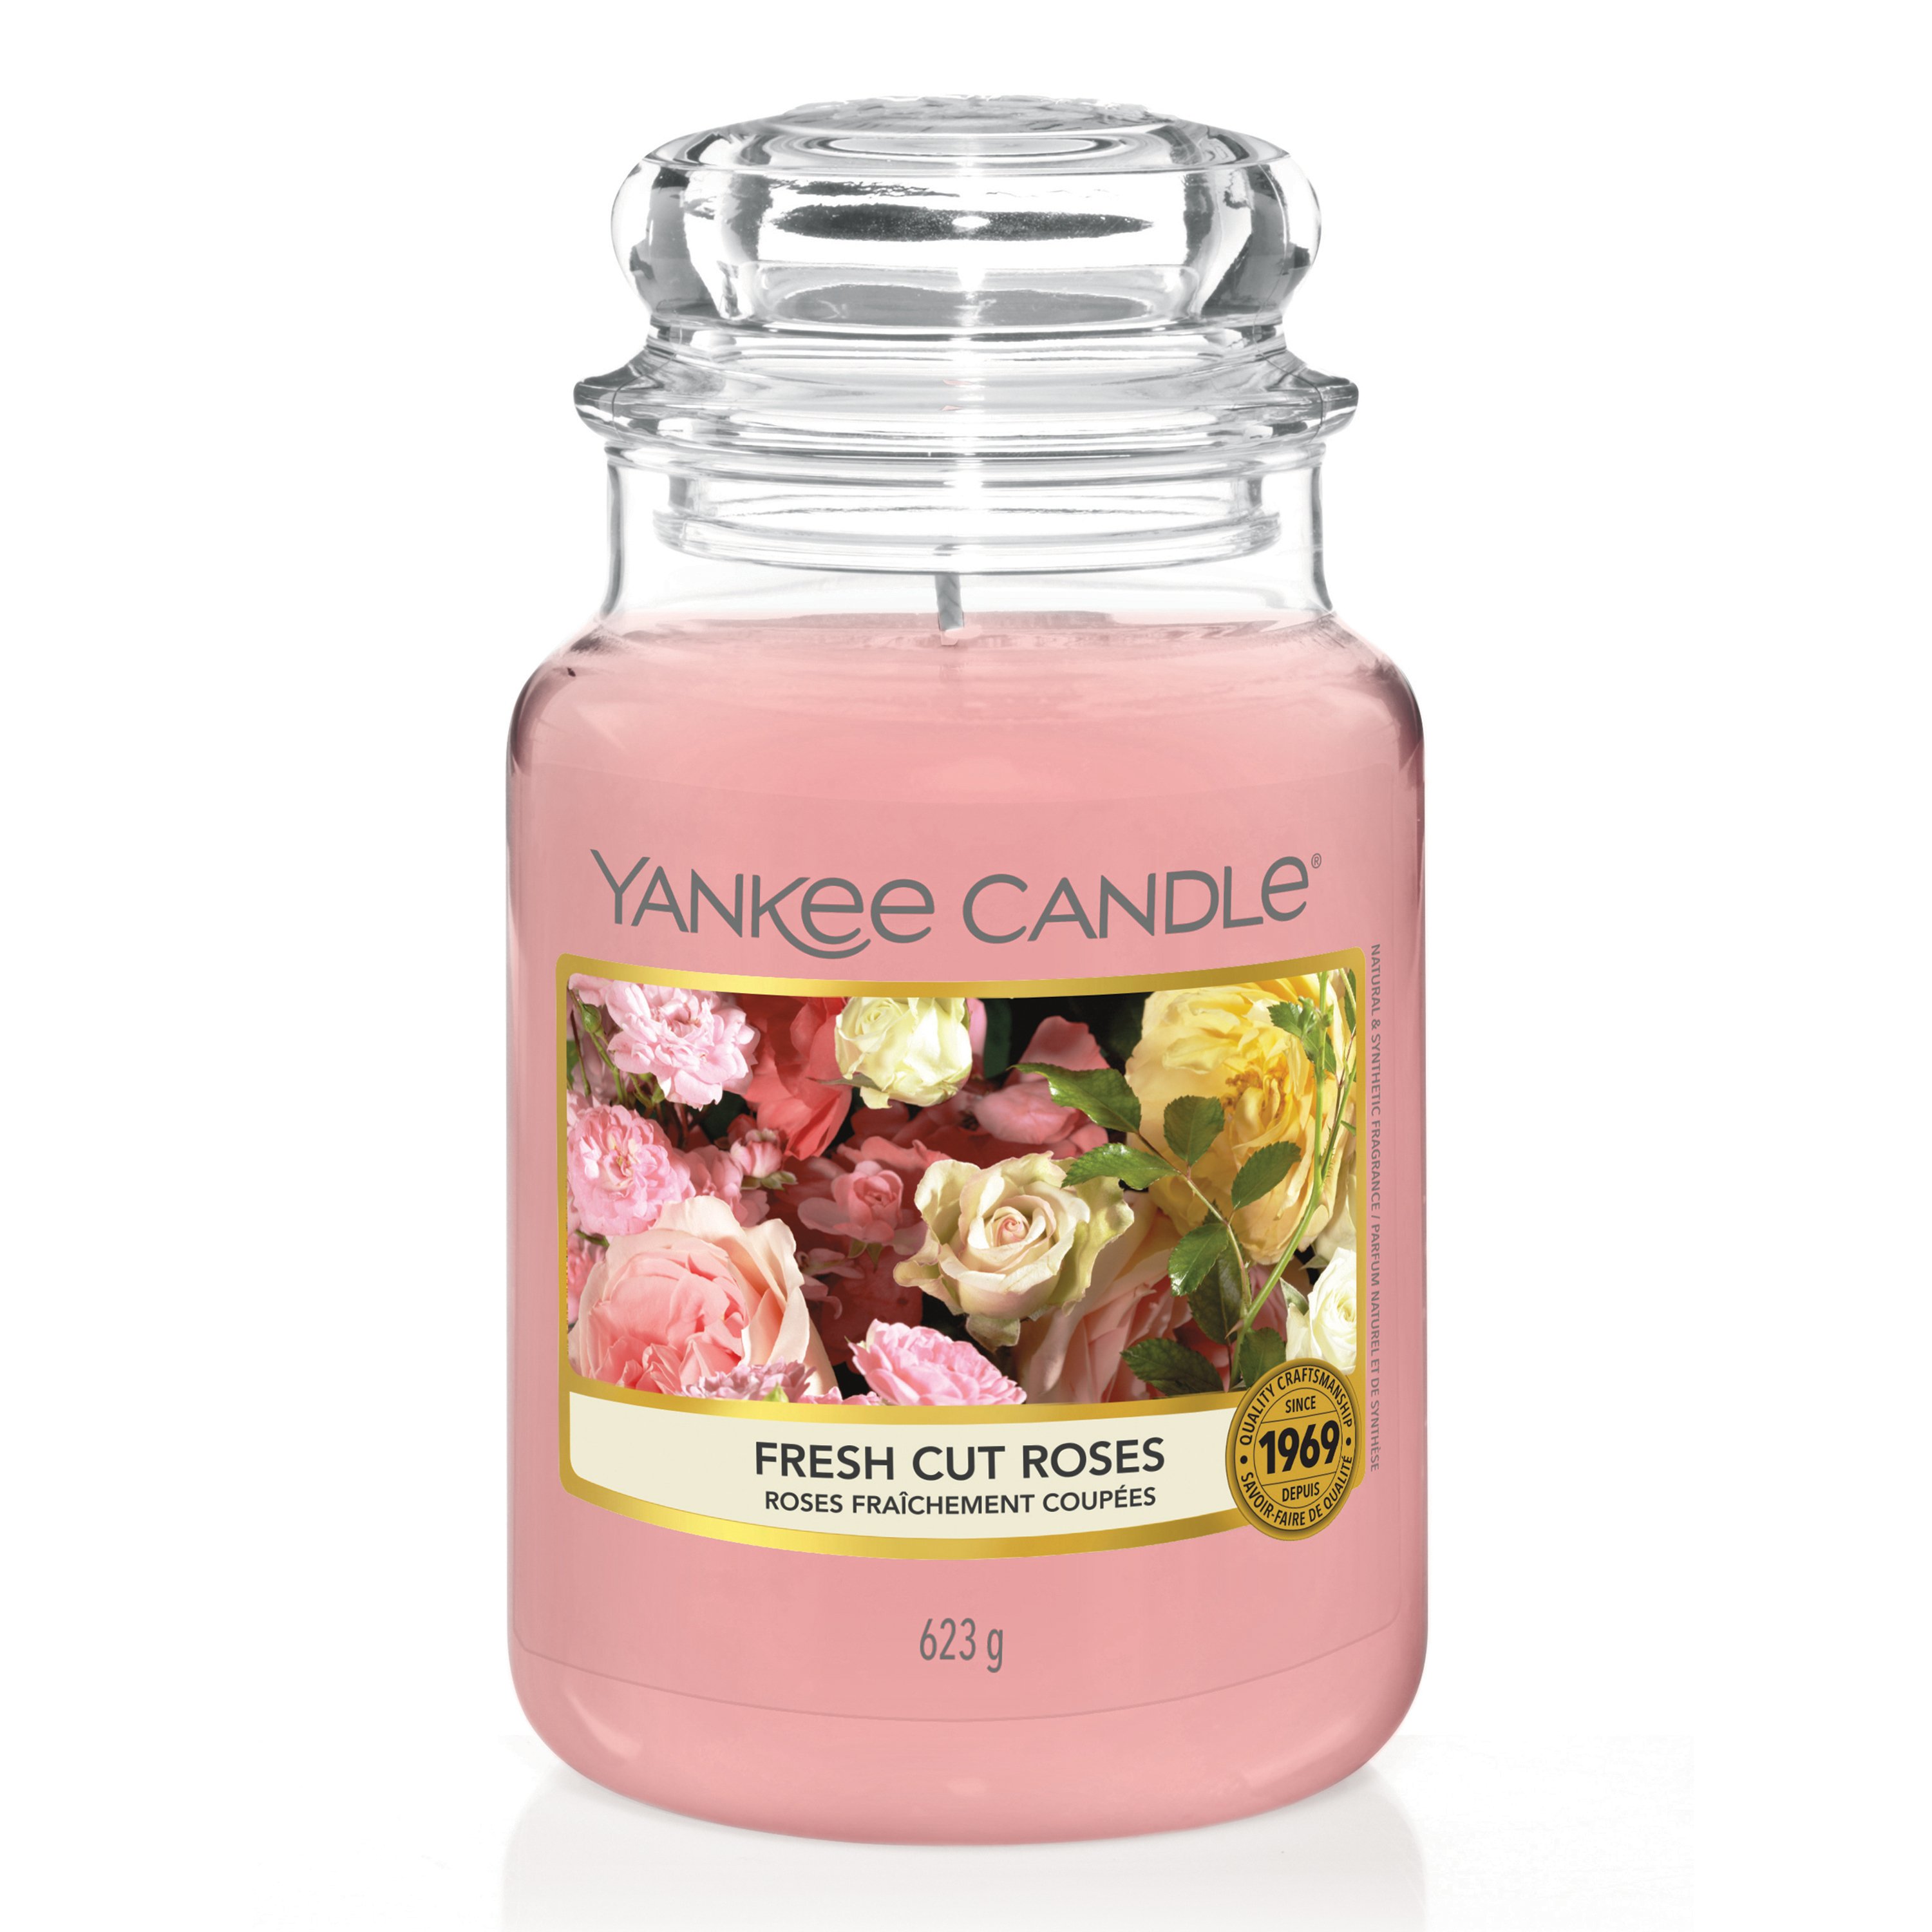 1 Yankee Candle SOFT BLANKET Large 1-Wick Classic Jar Candle 22 oz